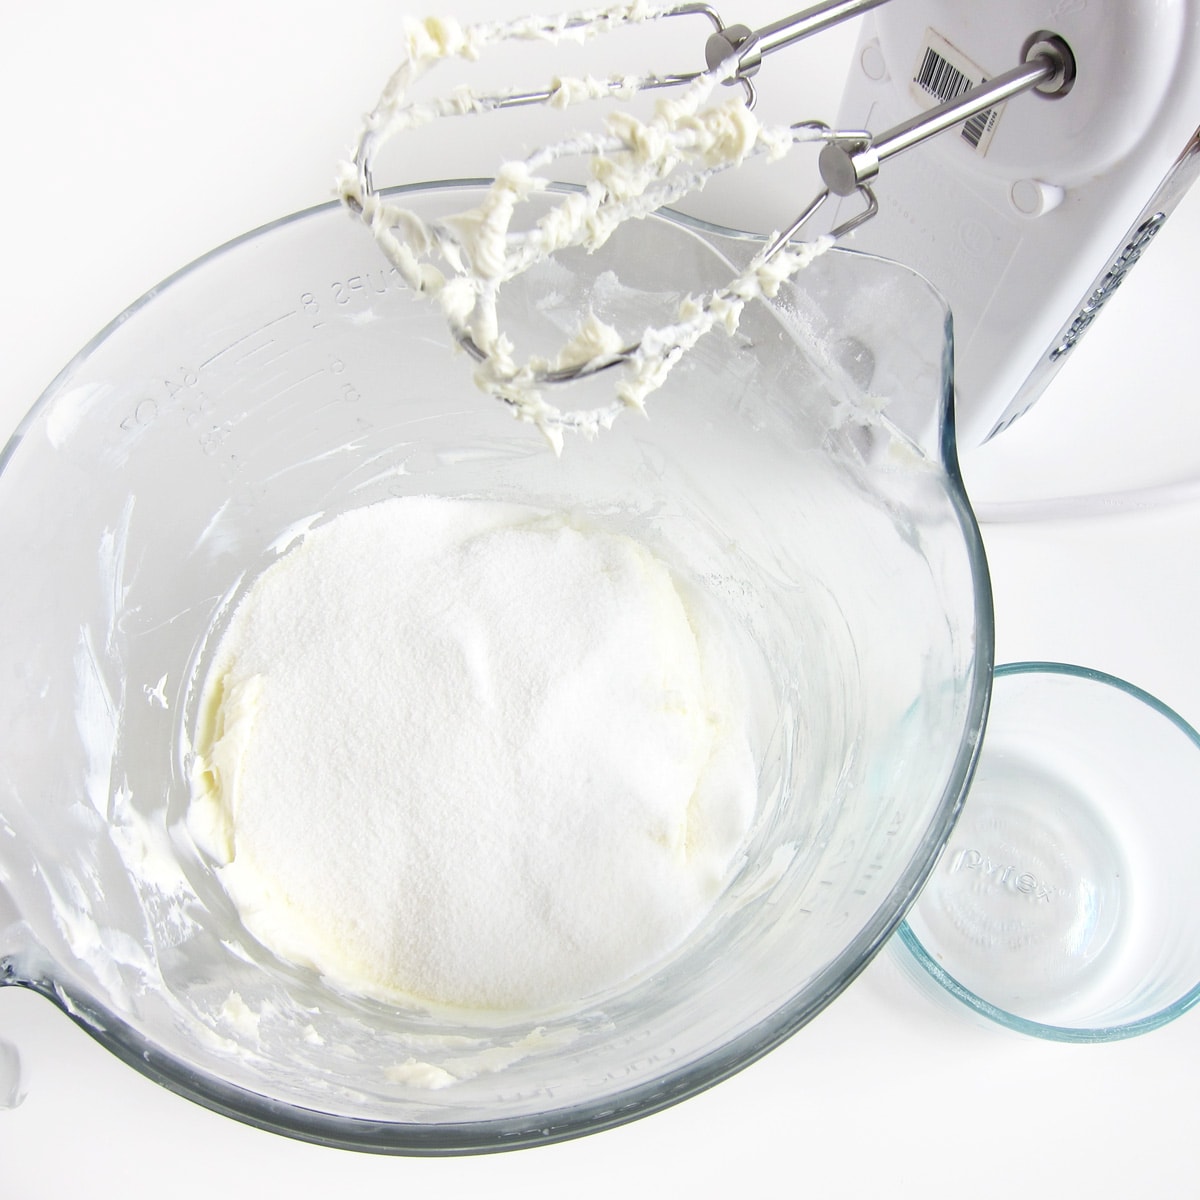 Sugar added to bowl of whipped cream cheese.